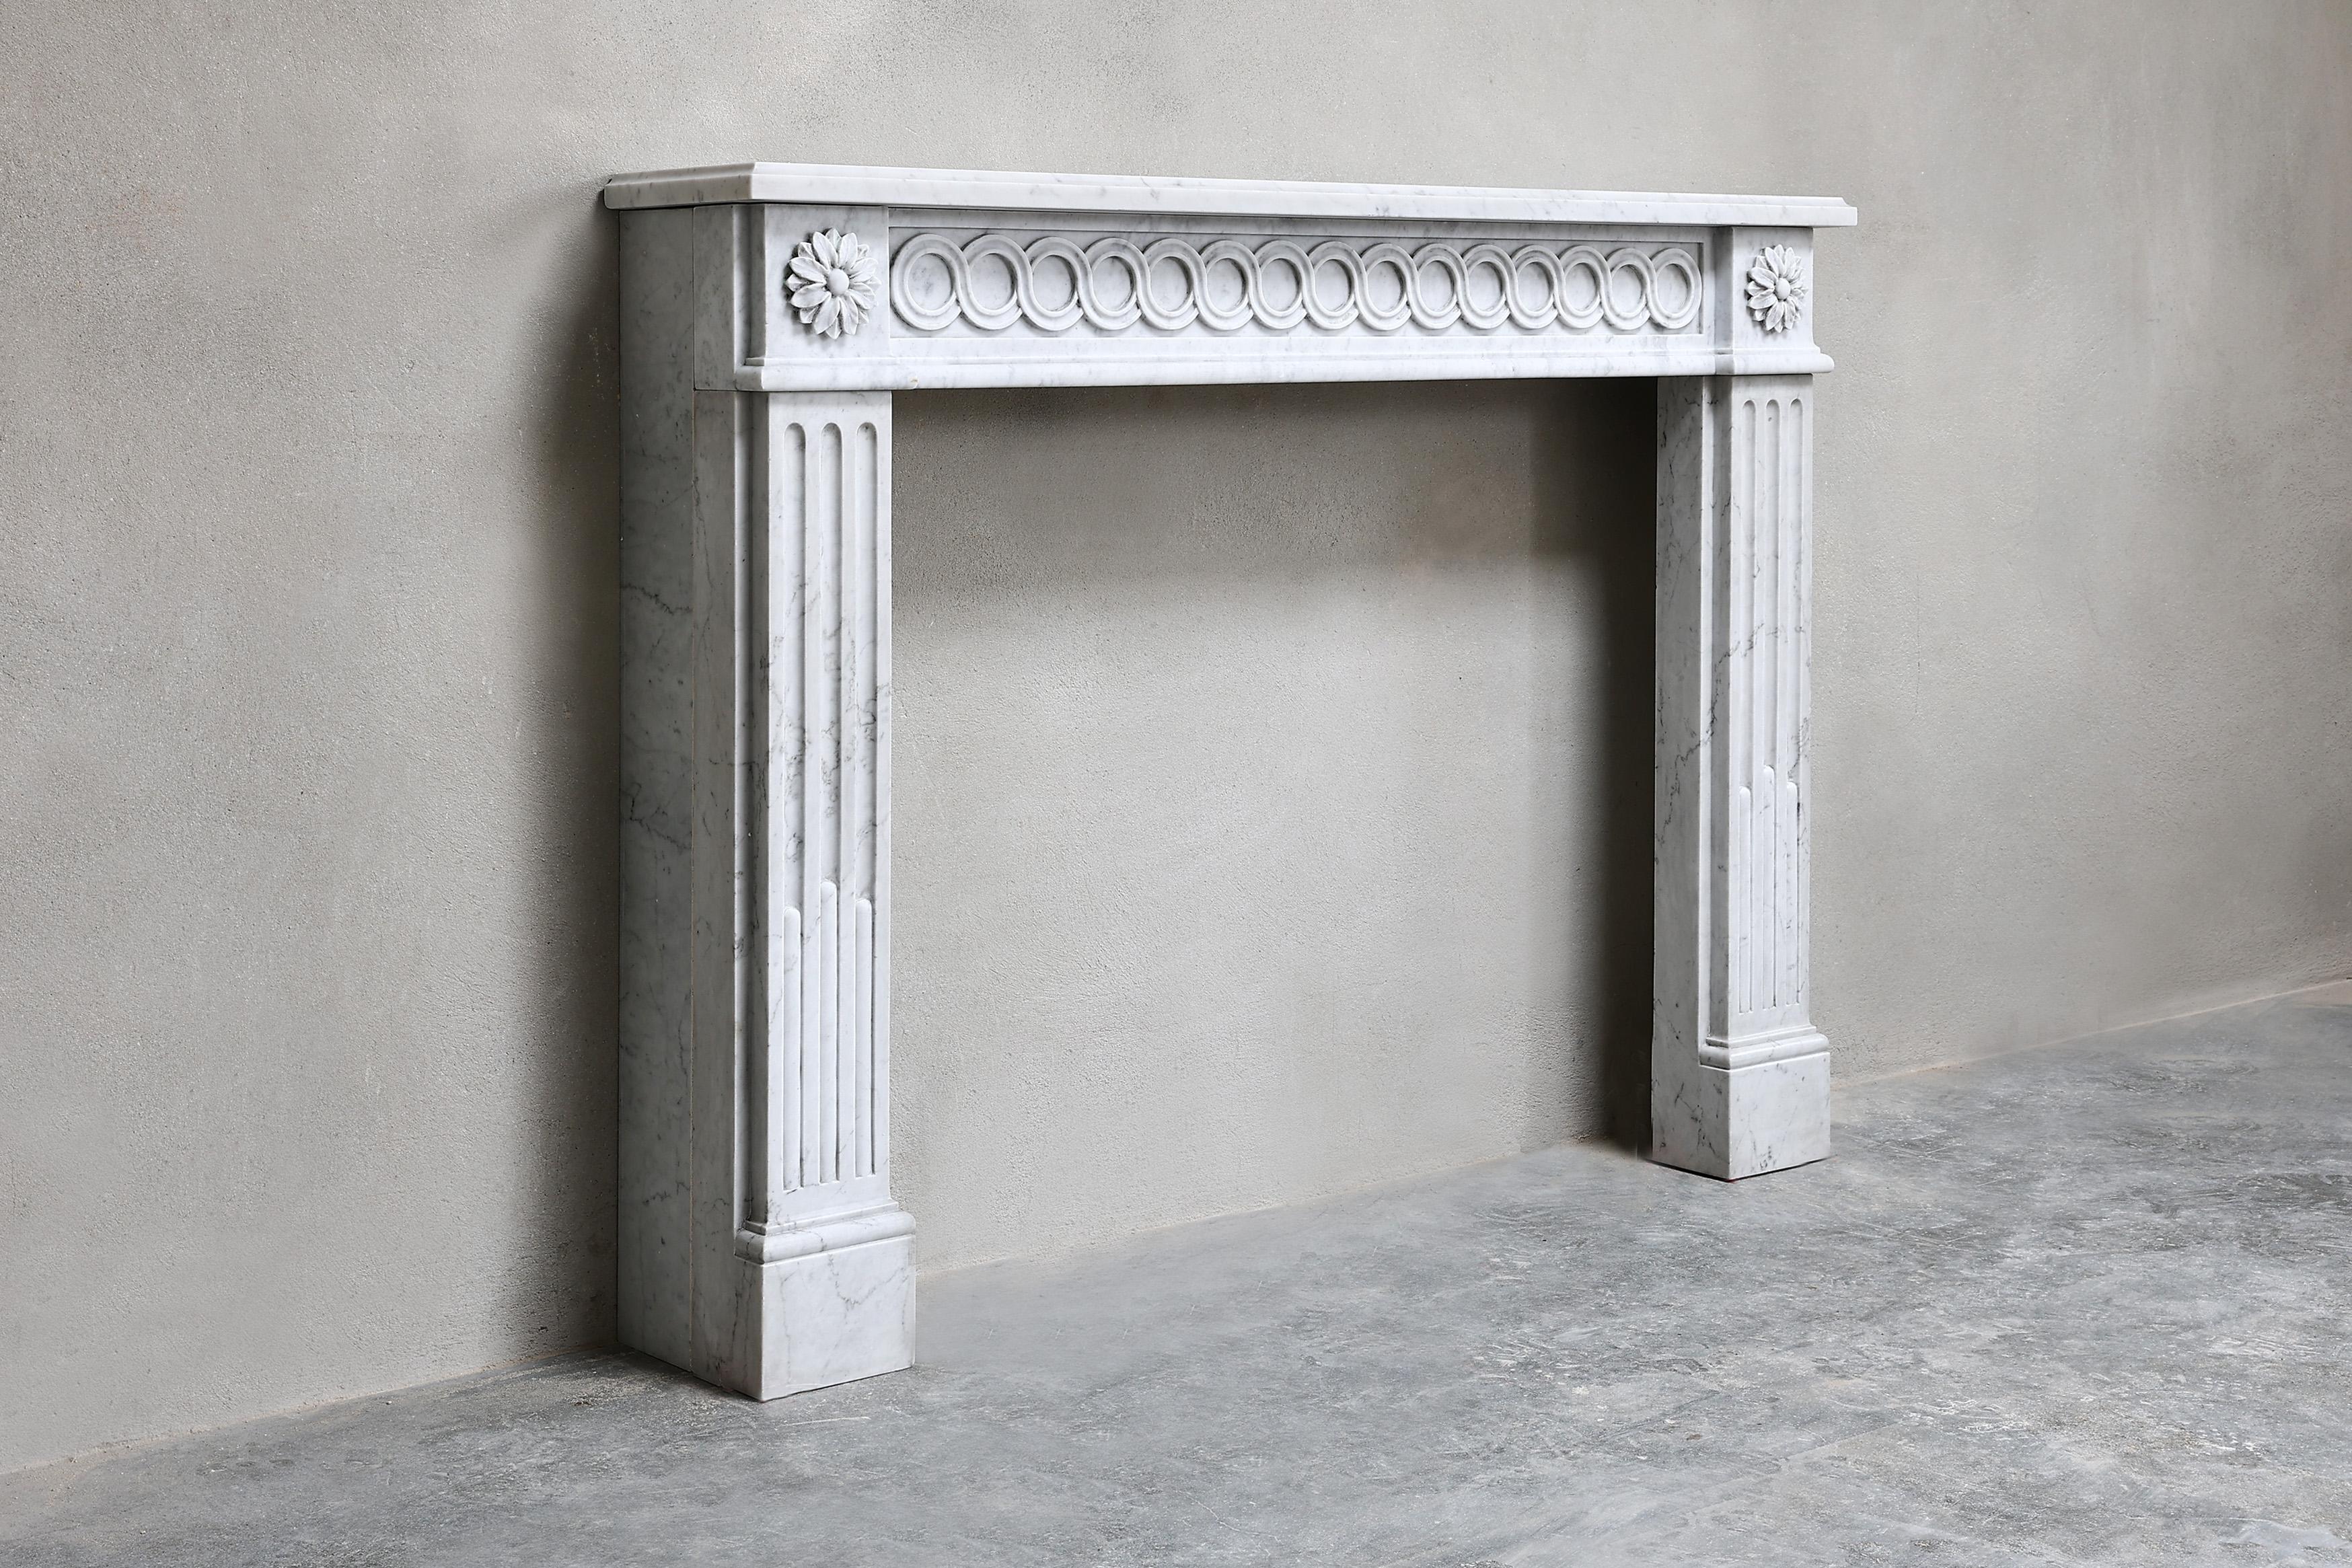 Beautiful compact antique fireplace made of Carrara marble from Italy in style of Louis XVI. This fireplace from the 19th century has straight shapes and elegant ornaments, making the fireplace graceful! An asset to many interiors.